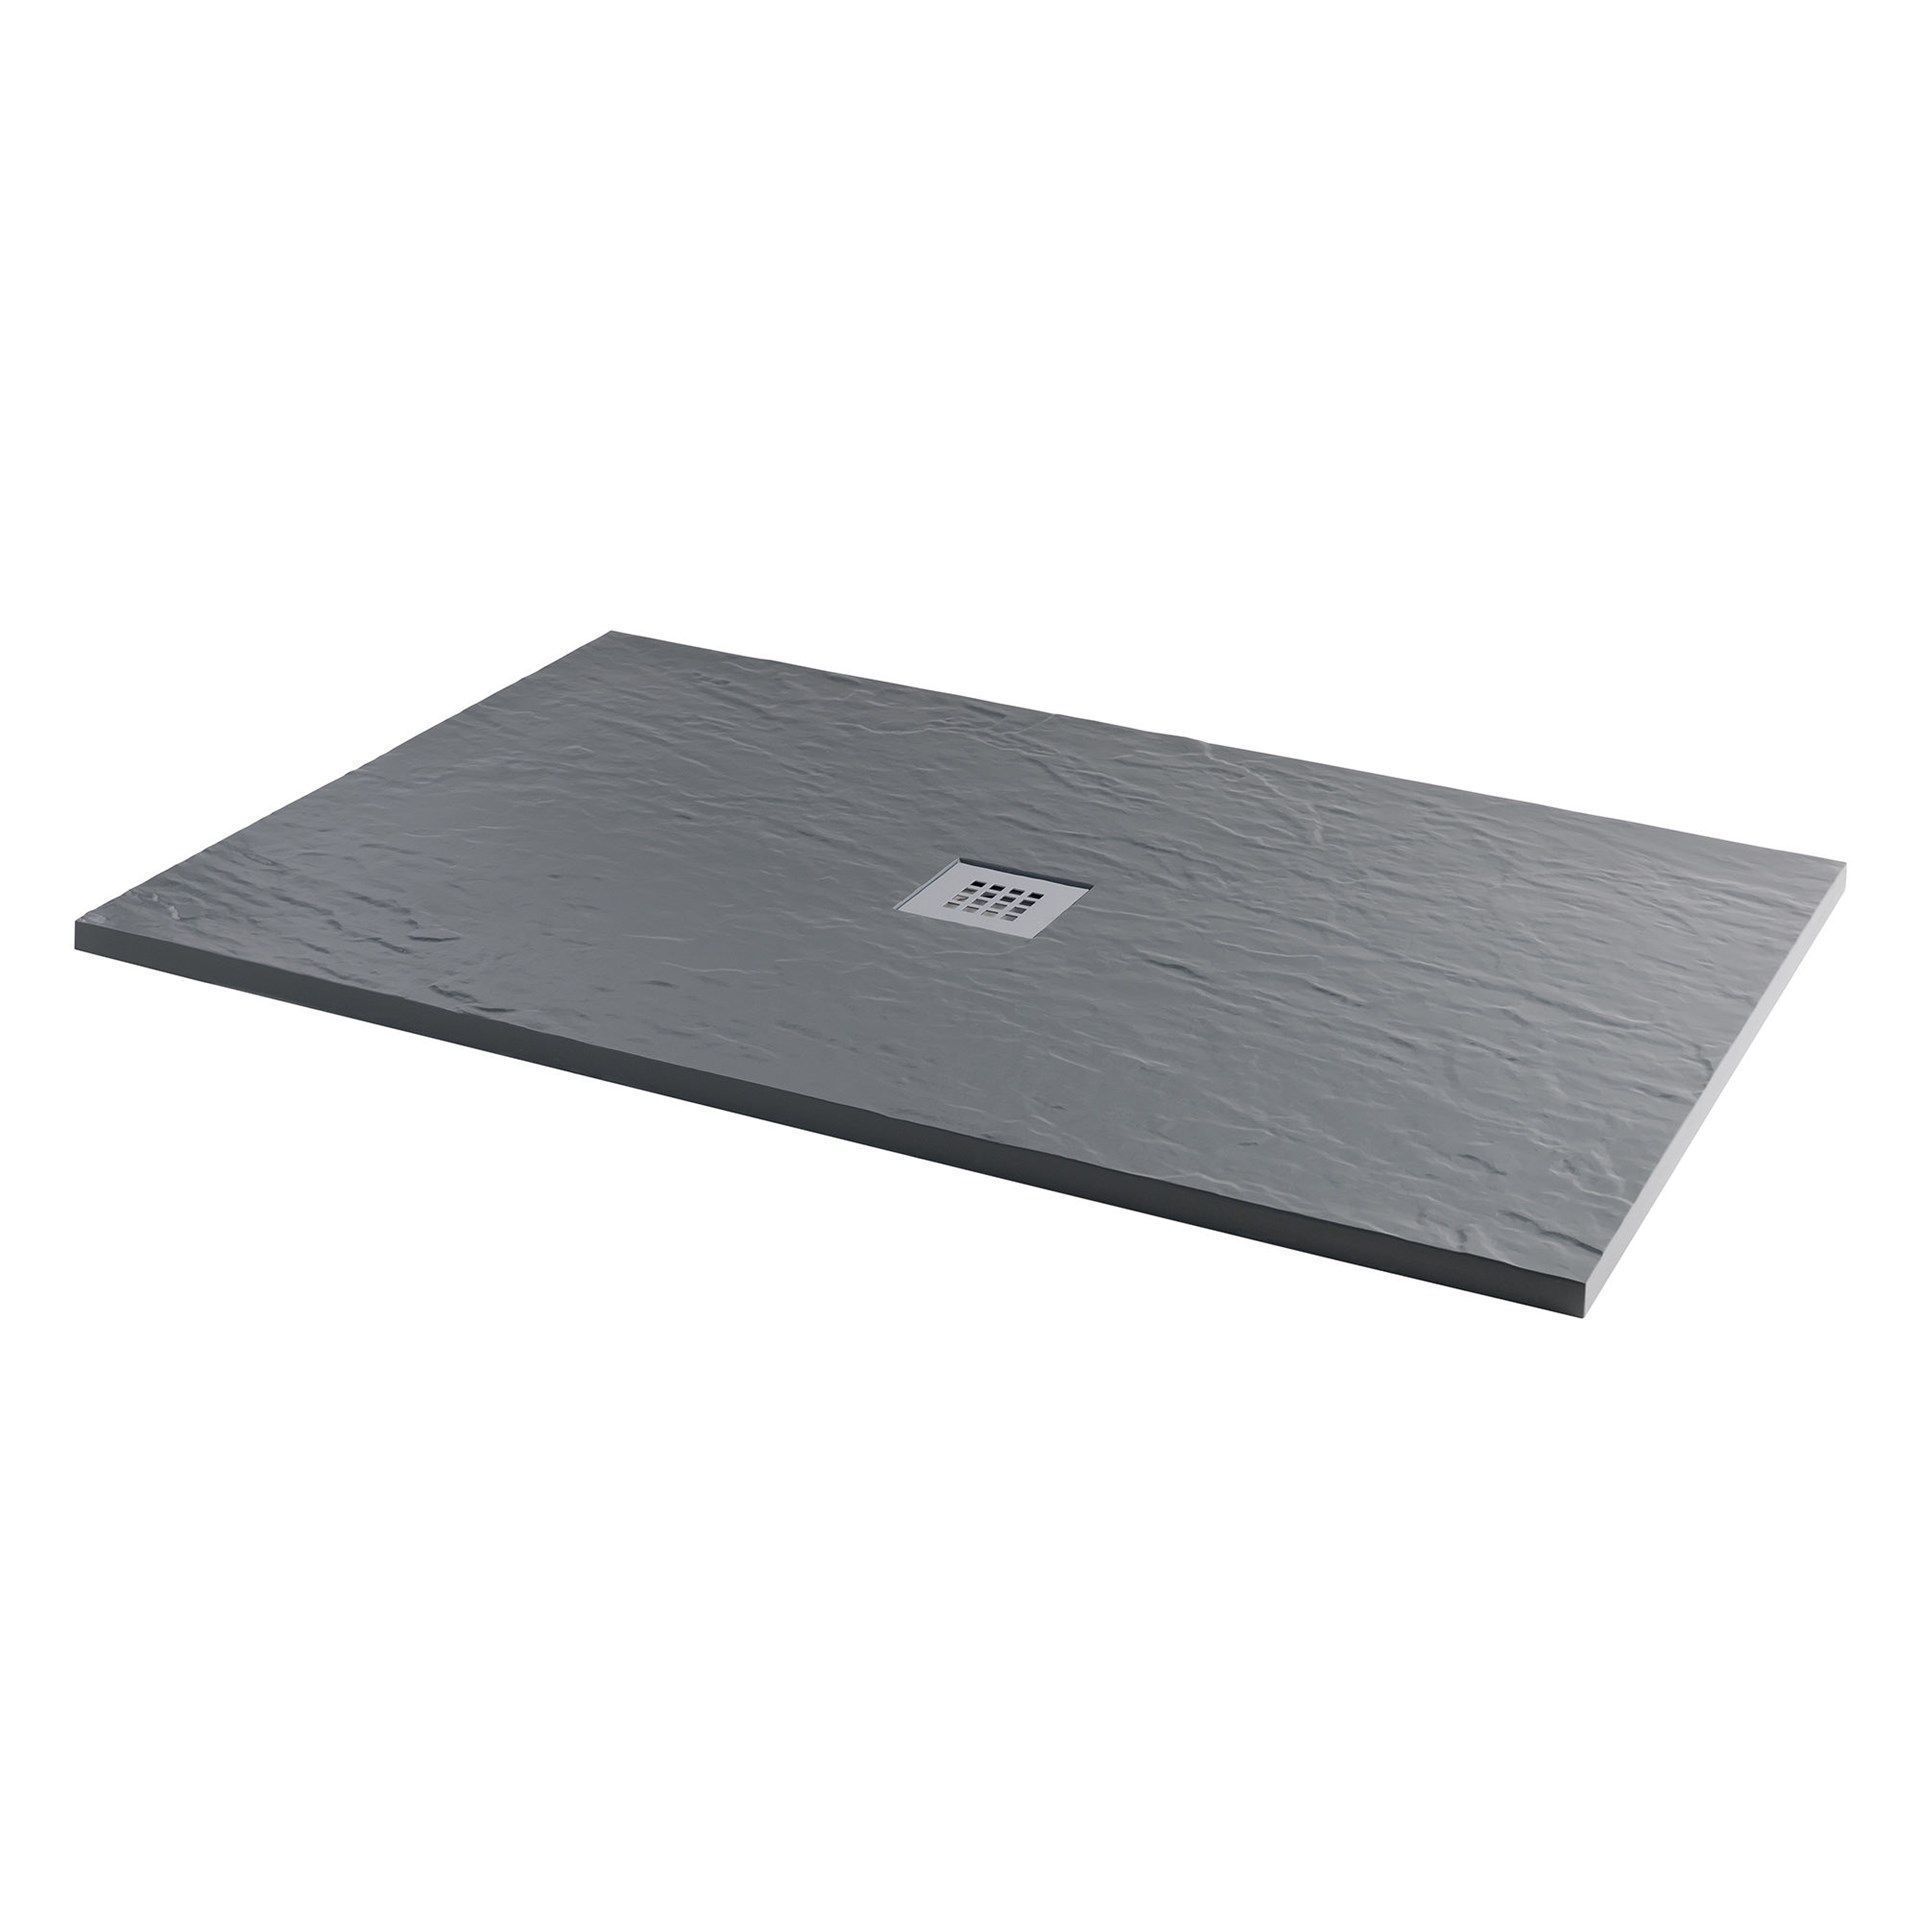 New 1000x800 mm Rectangular Slate Effect Shower Tray In Grey. Manufactured In The UK From High - Image 2 of 2